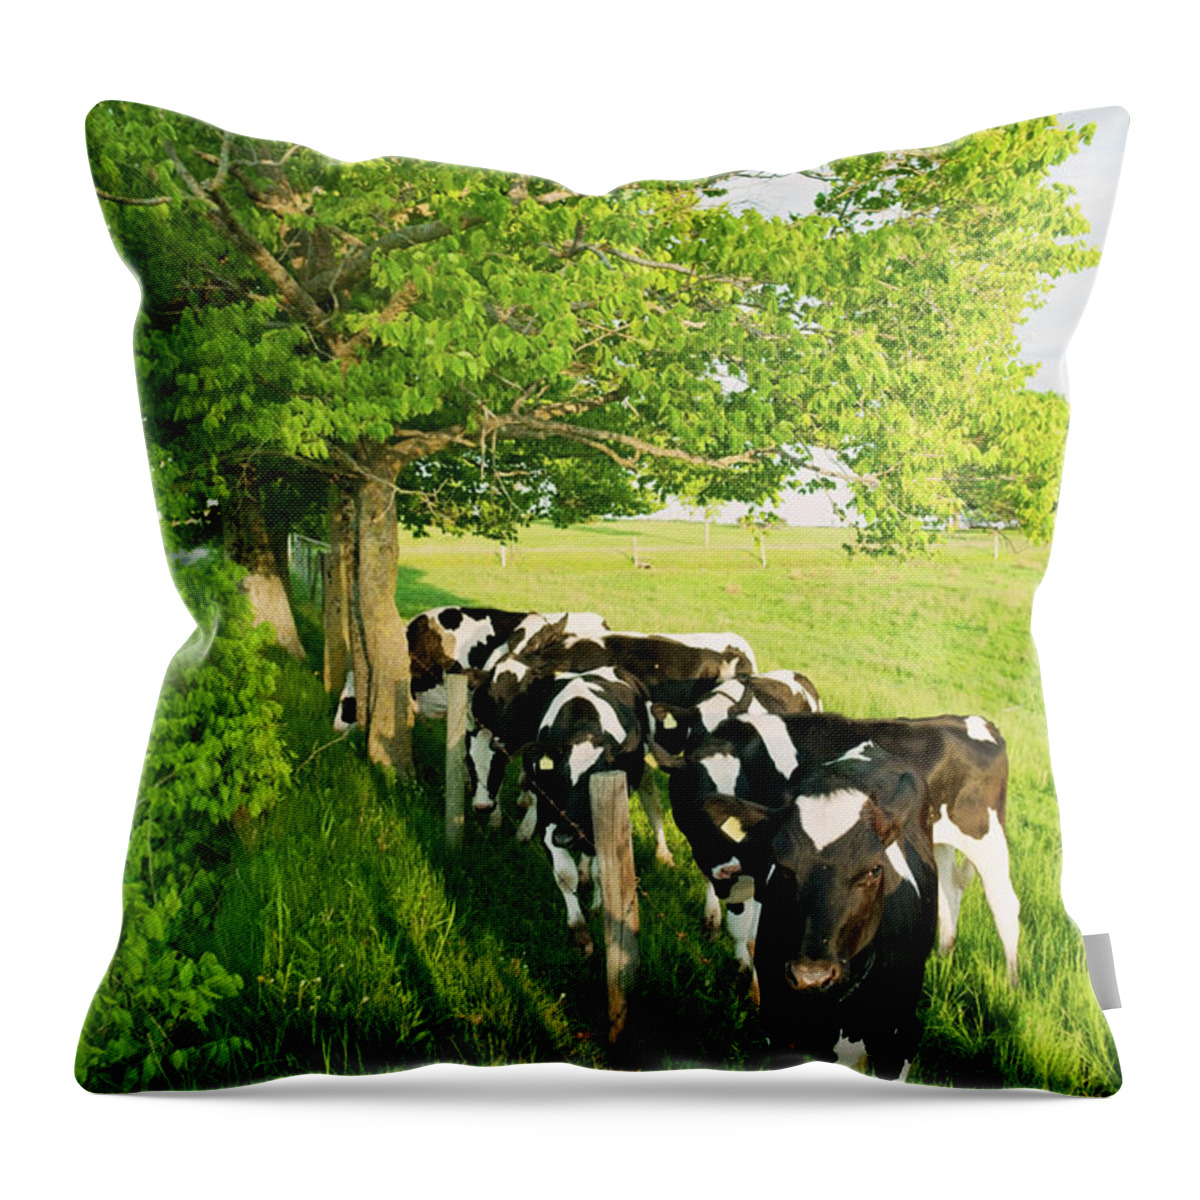 Cow Throw Pillow featuring the photograph Dairy Cows by Shaunl